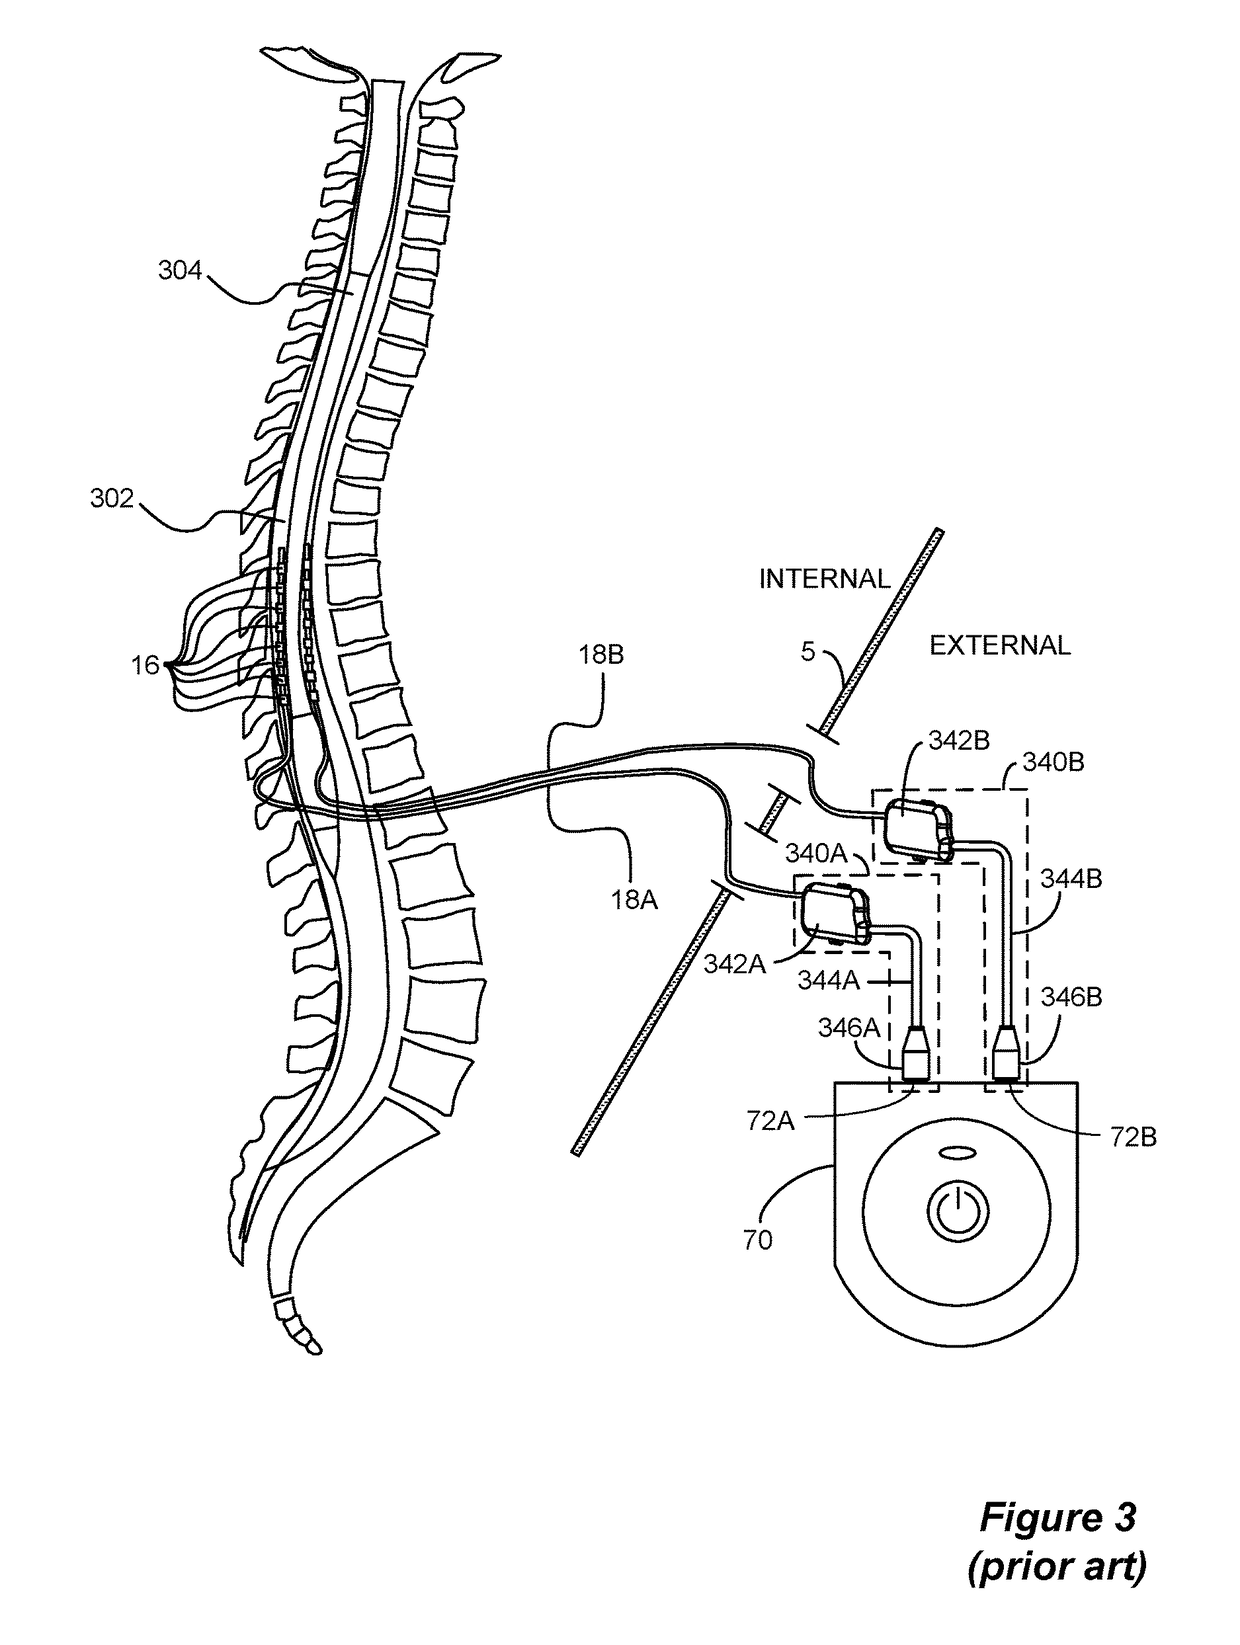 System to Estimate the Location of a Spinal Cord Physiological Midline